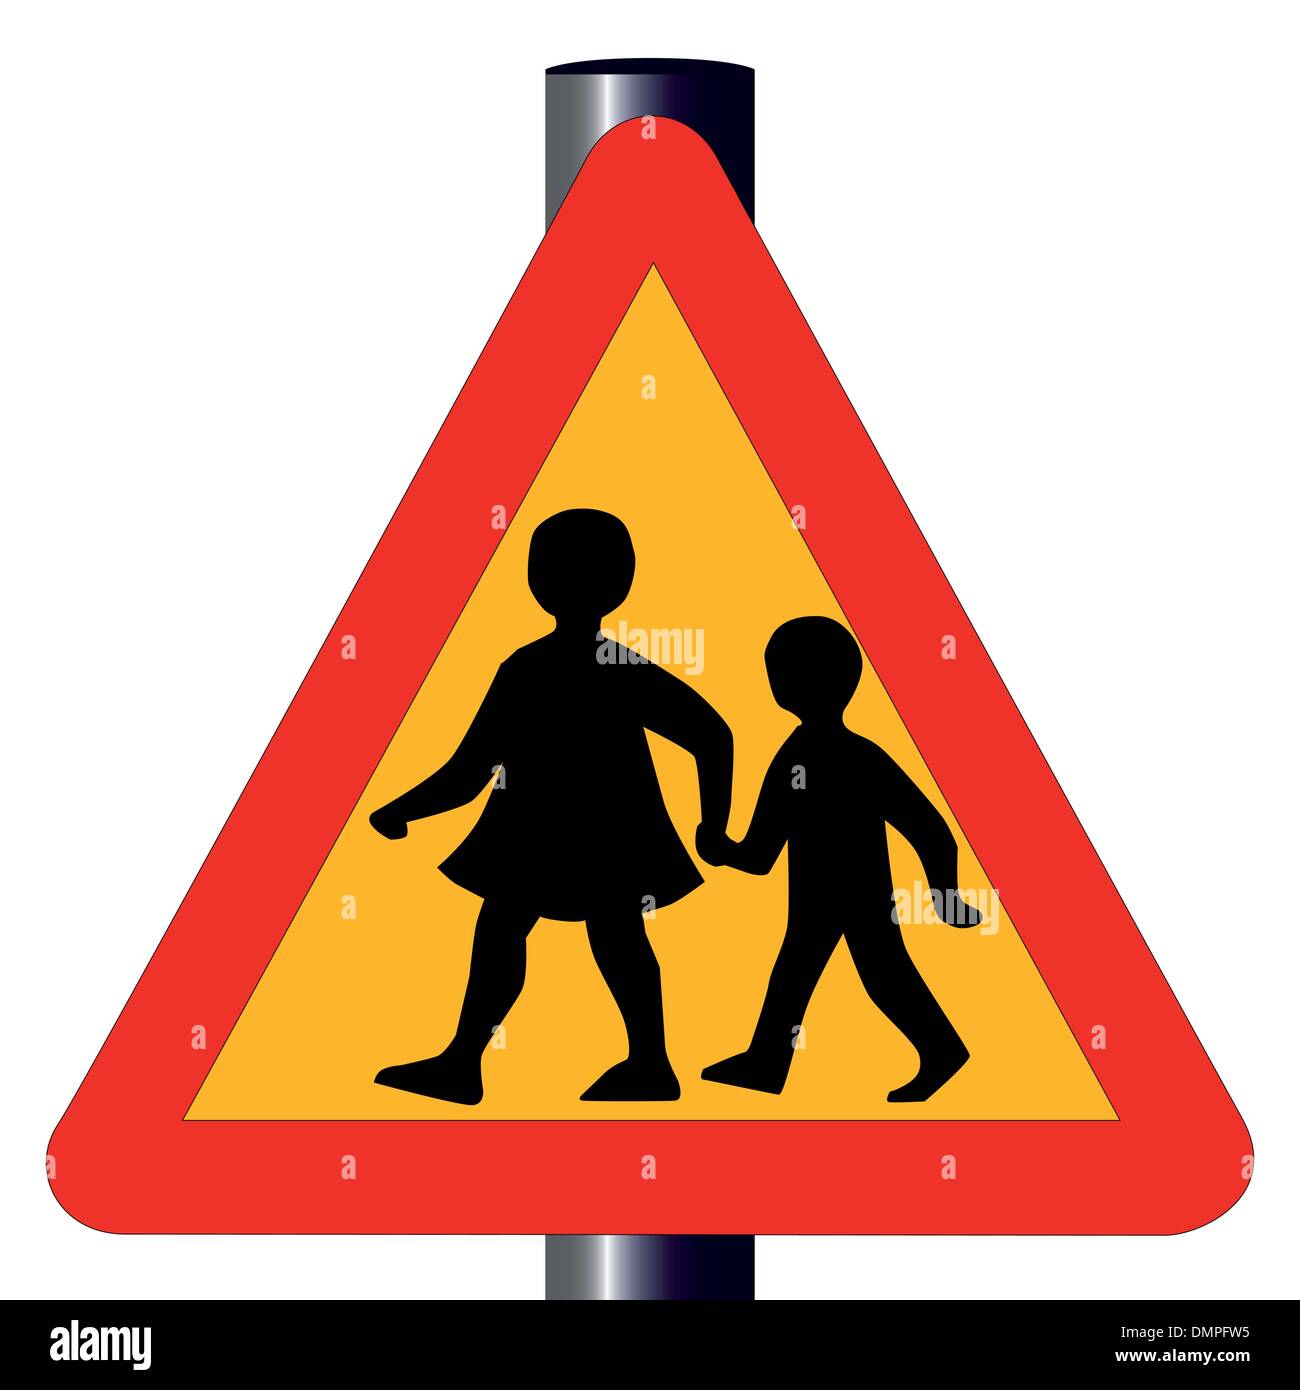 Children Crossing Road safety sign 